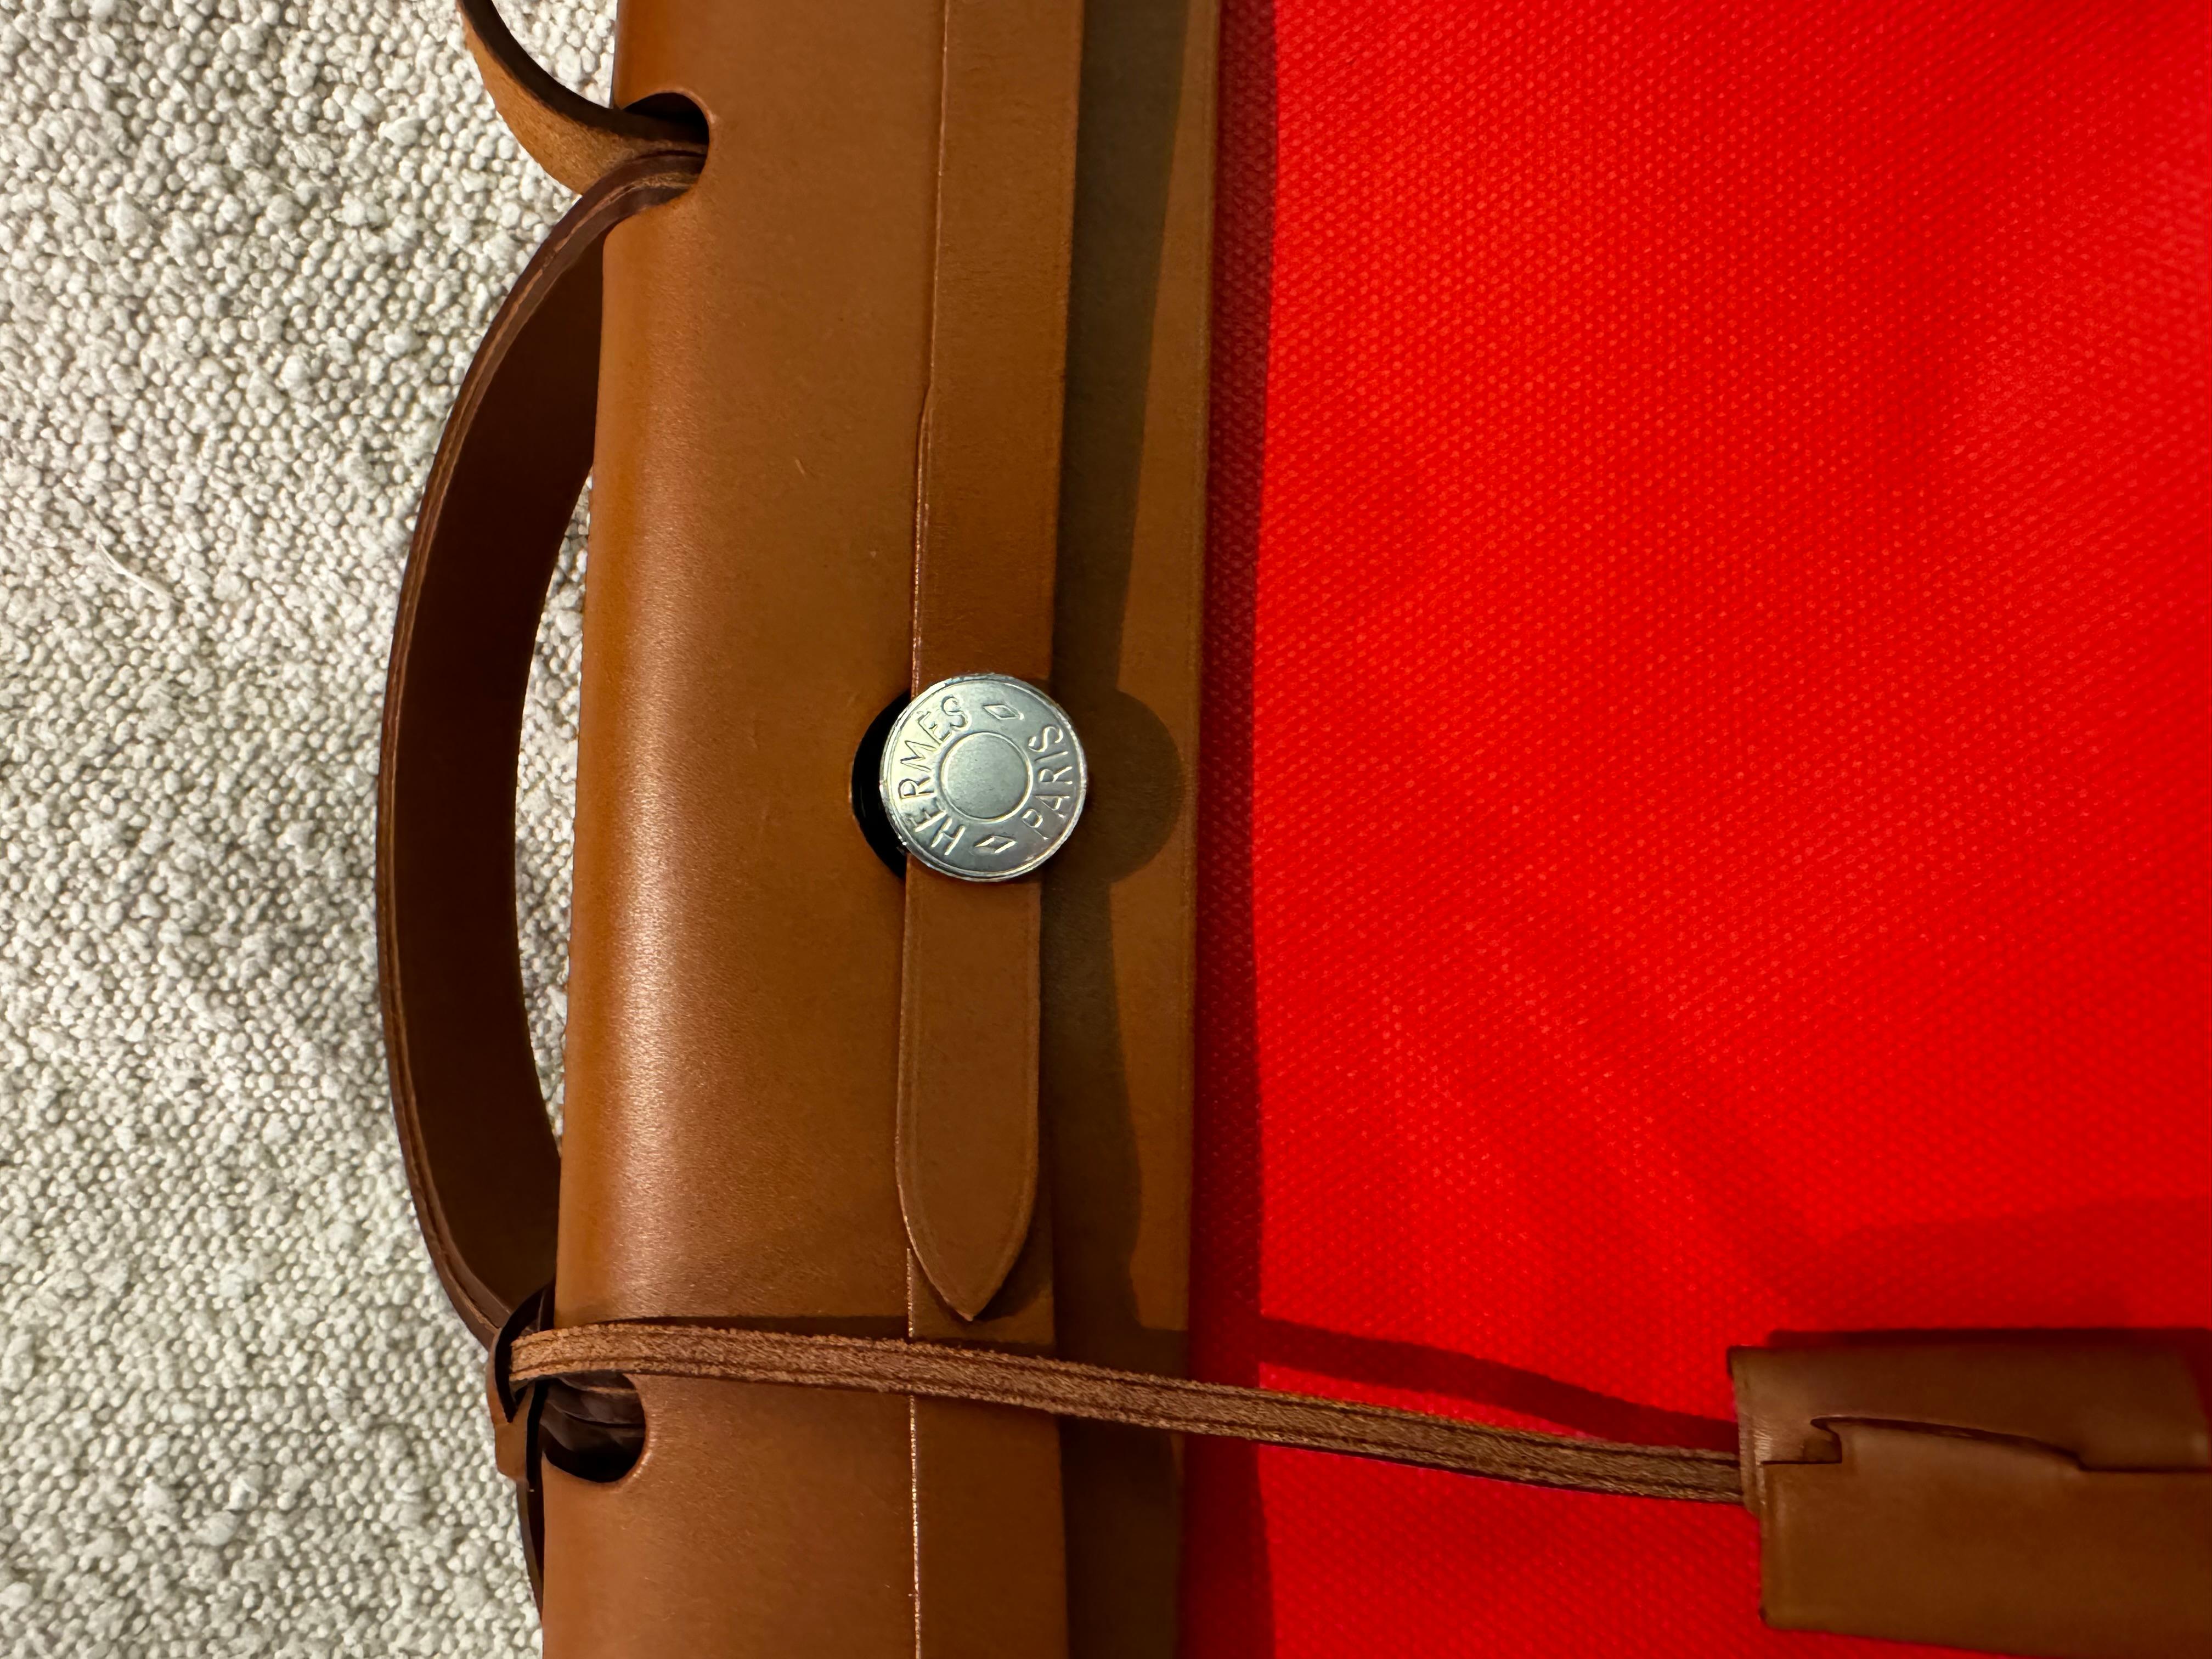 Hermès Herbag Zip 31  Fauve Vache and Orange Mecano Toile PM Palladium Hardware. Hermès Herbag 31 is handcrafted from Vache Hunter in Fauve and finished with the signature “Clou de Selle” clasp. The body is made from Orange Mécano and Écru Coated